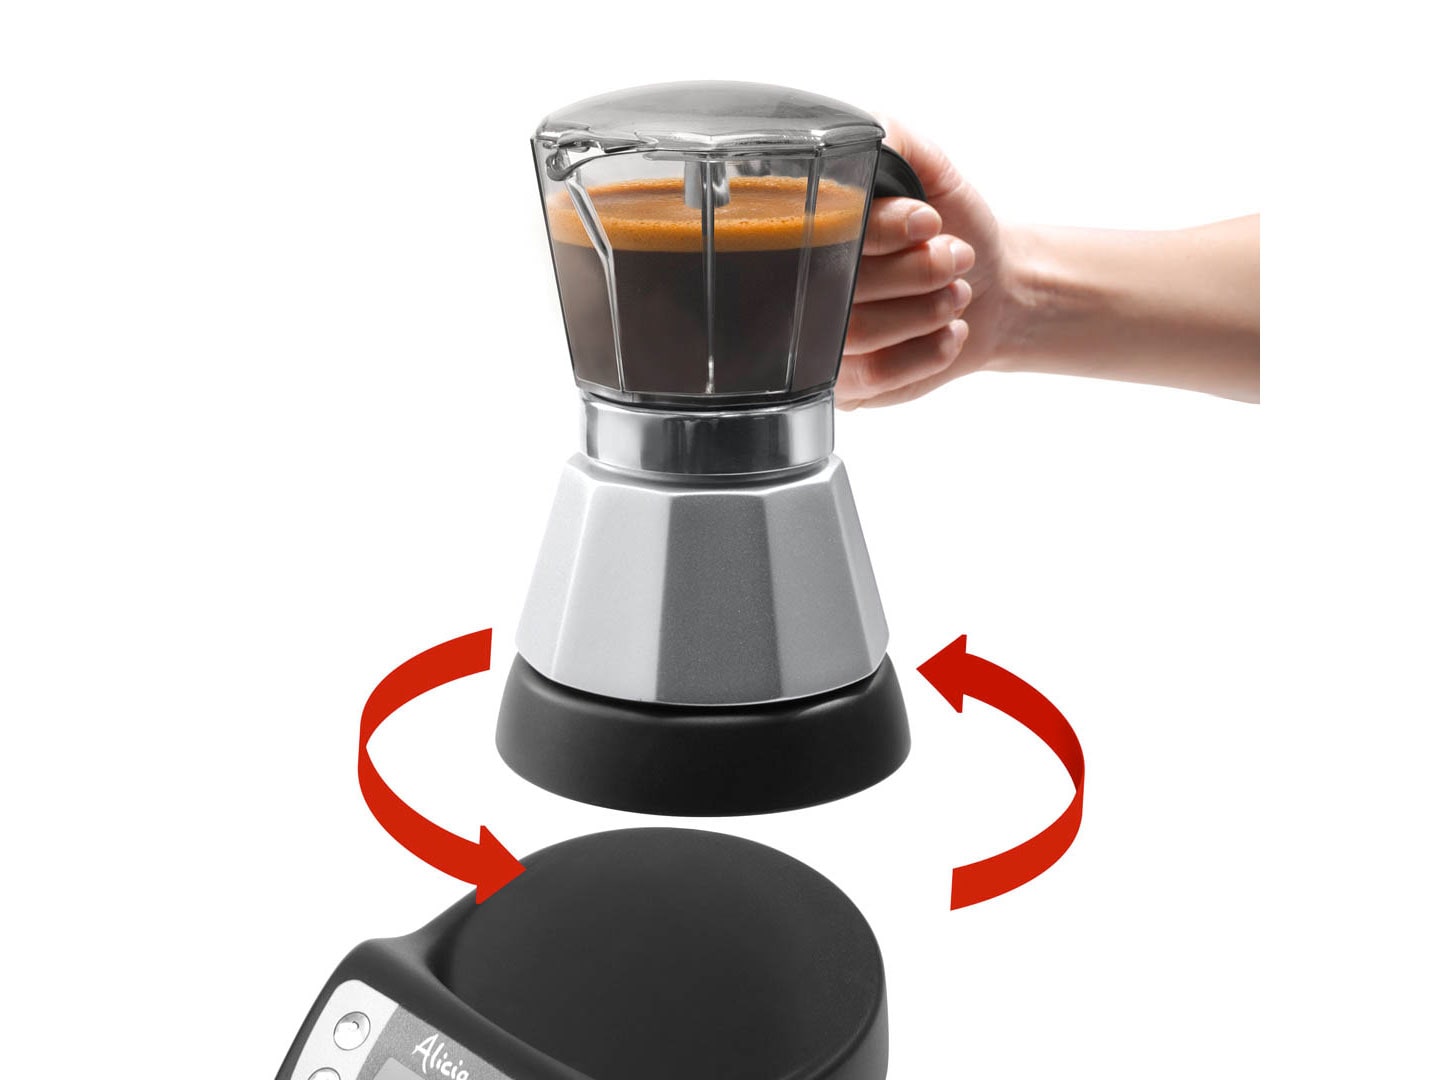 Delonghi Alicia Moka Pot - Everything you ever wanted to know - Bean Hoppers